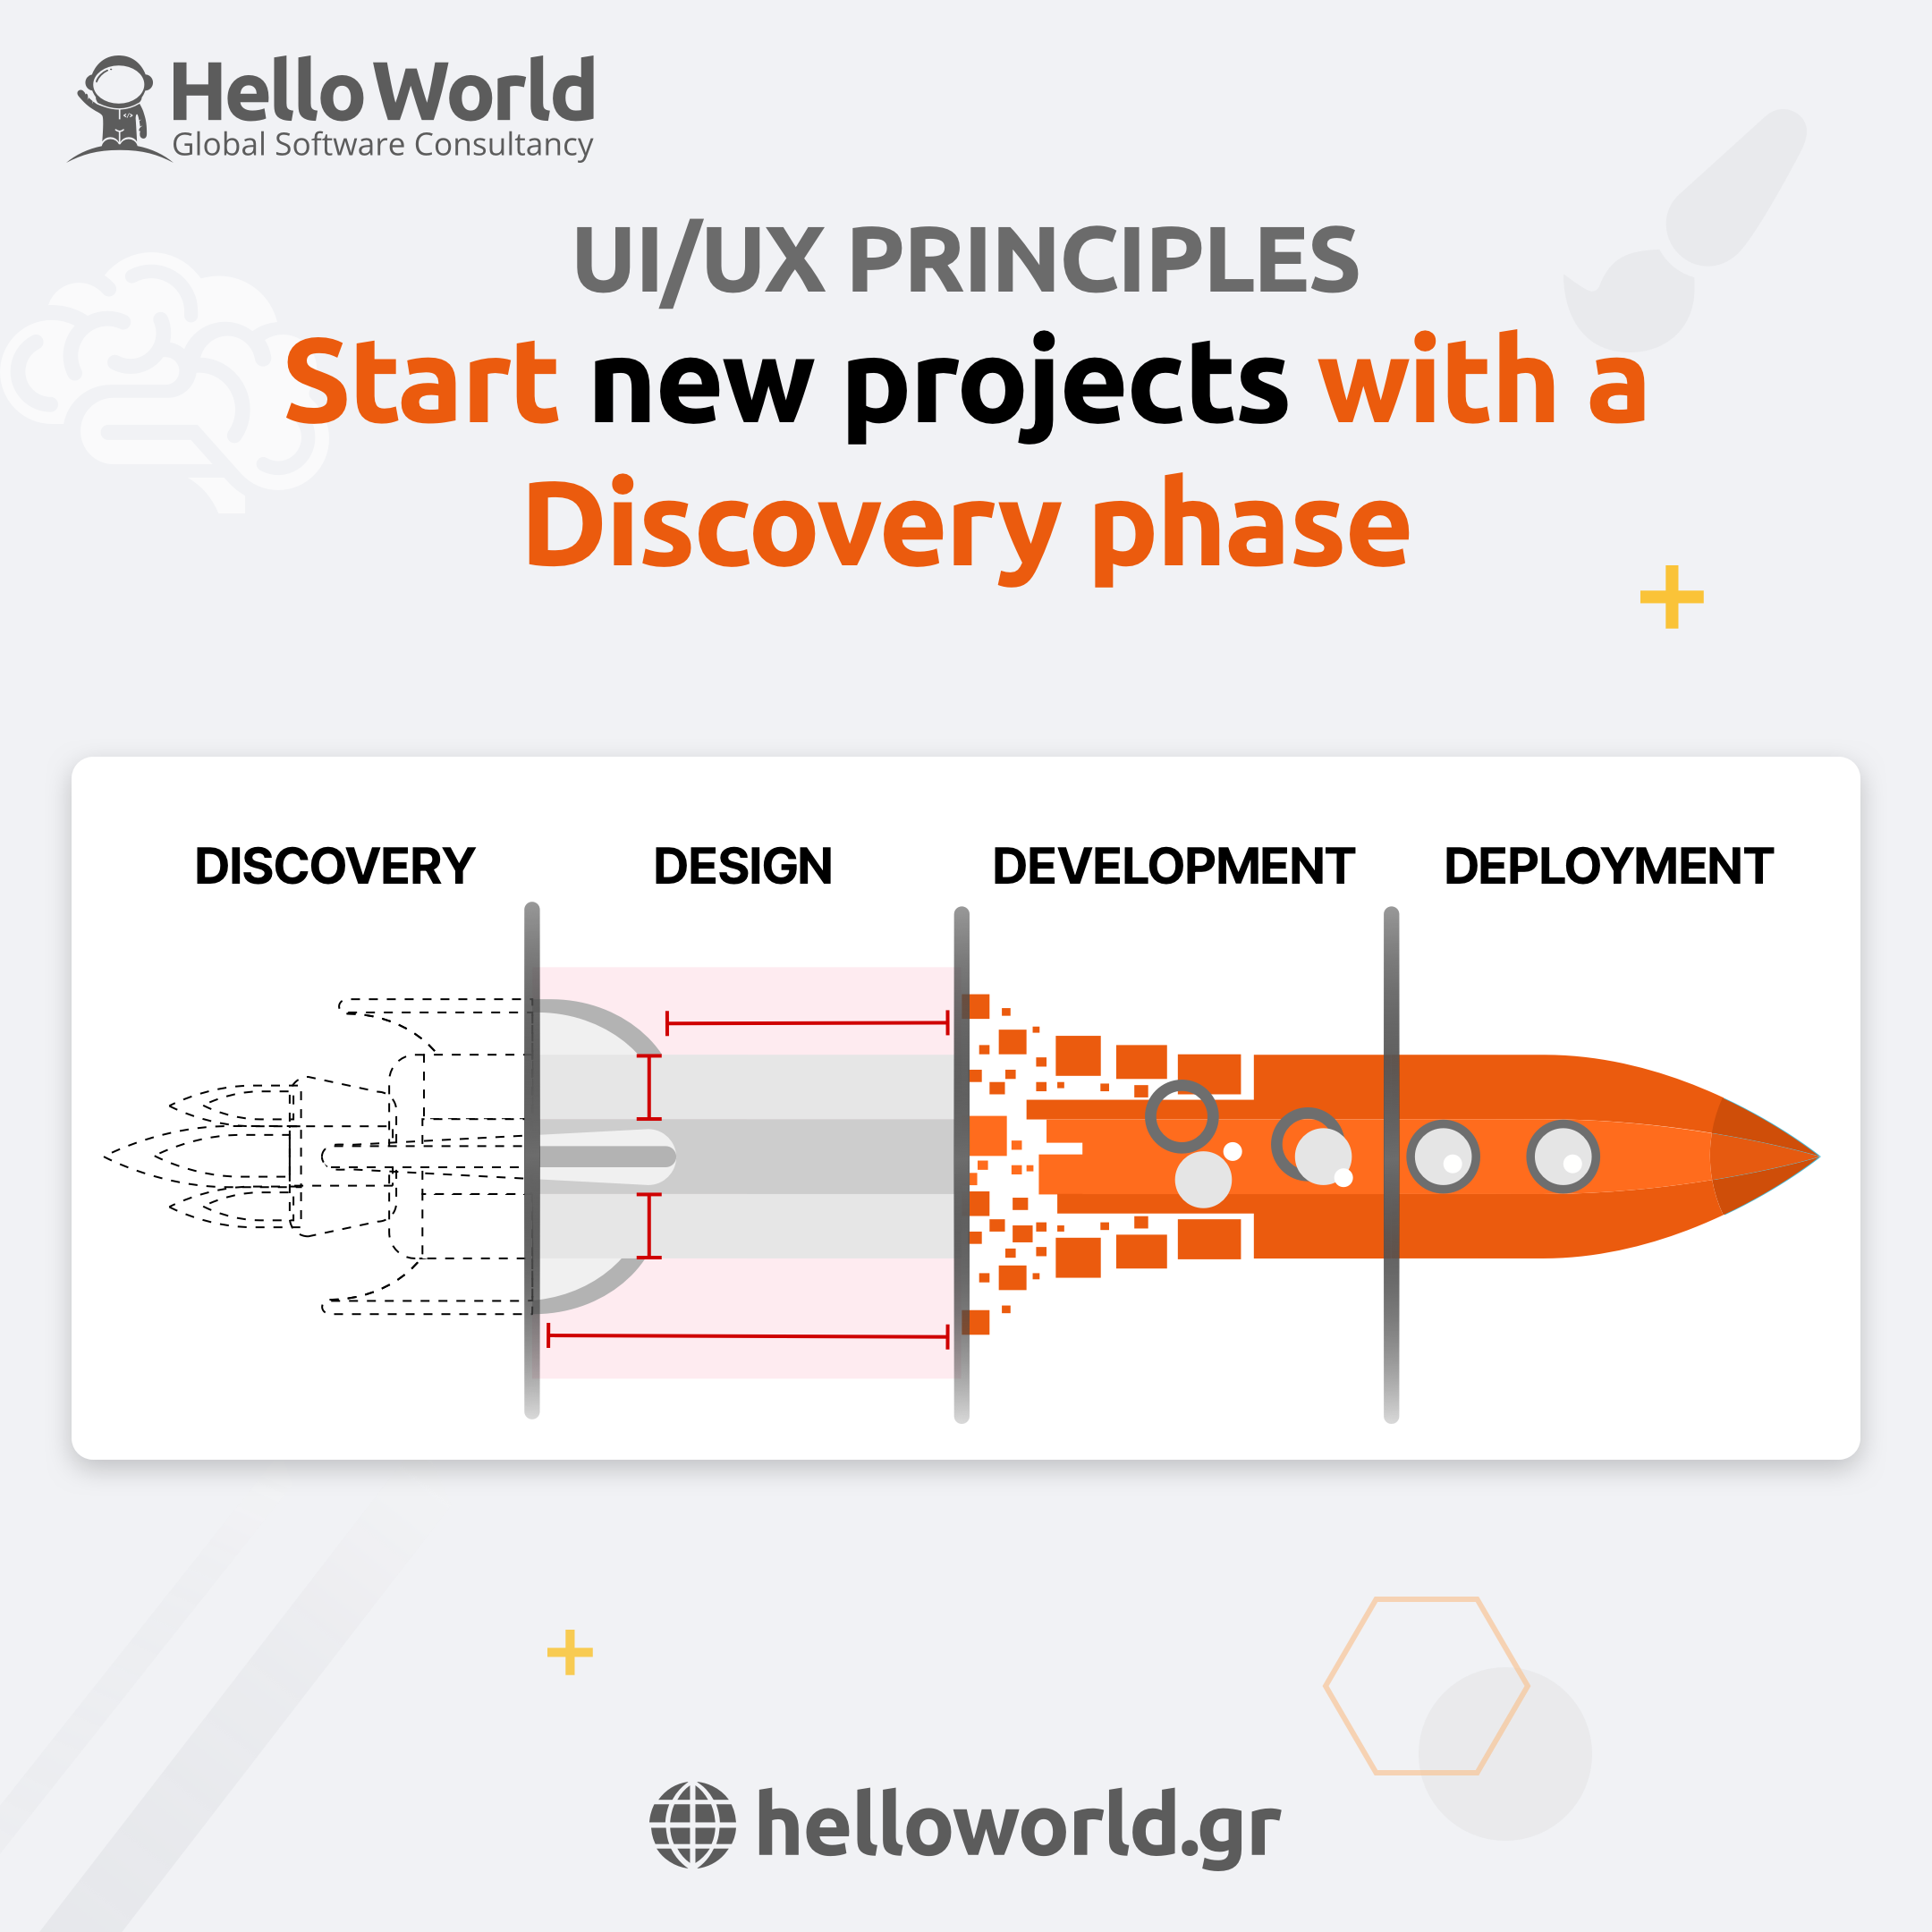 Start new projects with a Discovery phase